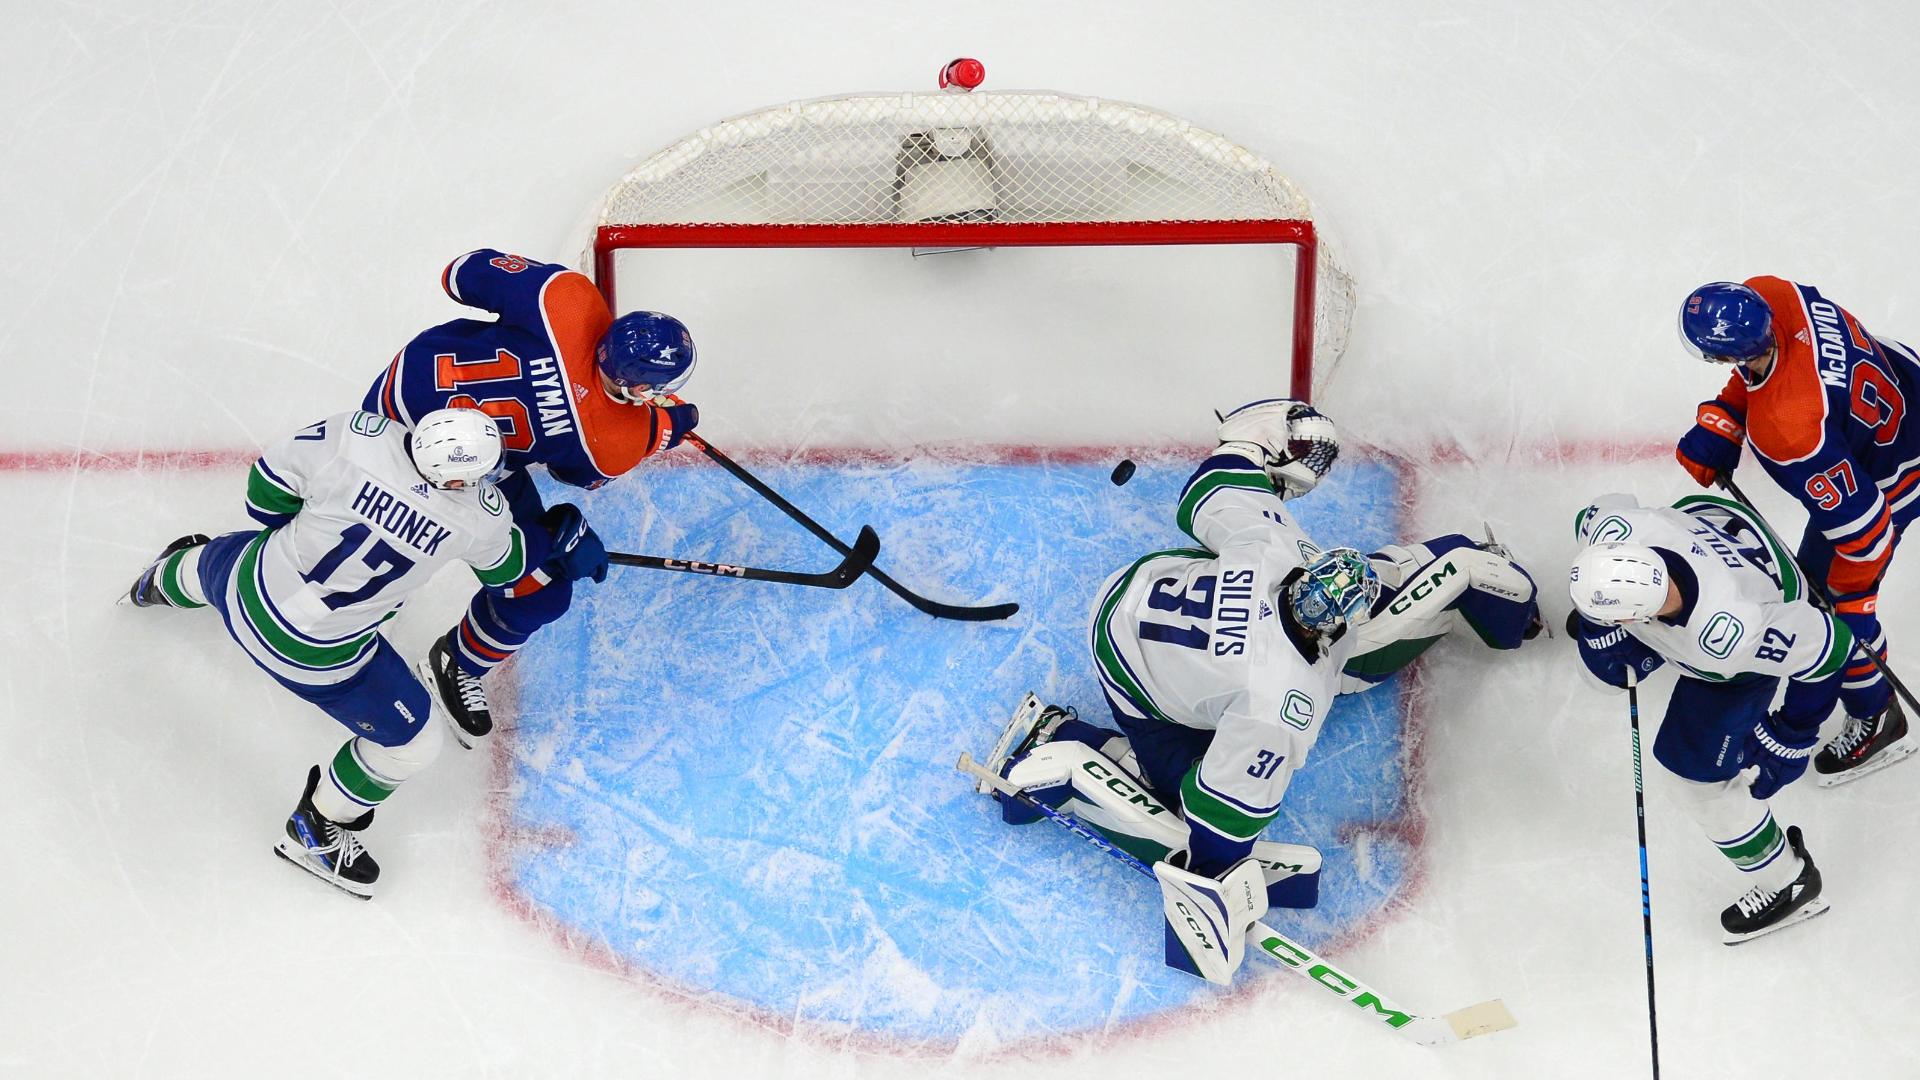 Bouchard scores late winner  Oilers edge Canucks 3-2 to tie playoff series at 2 games apiece